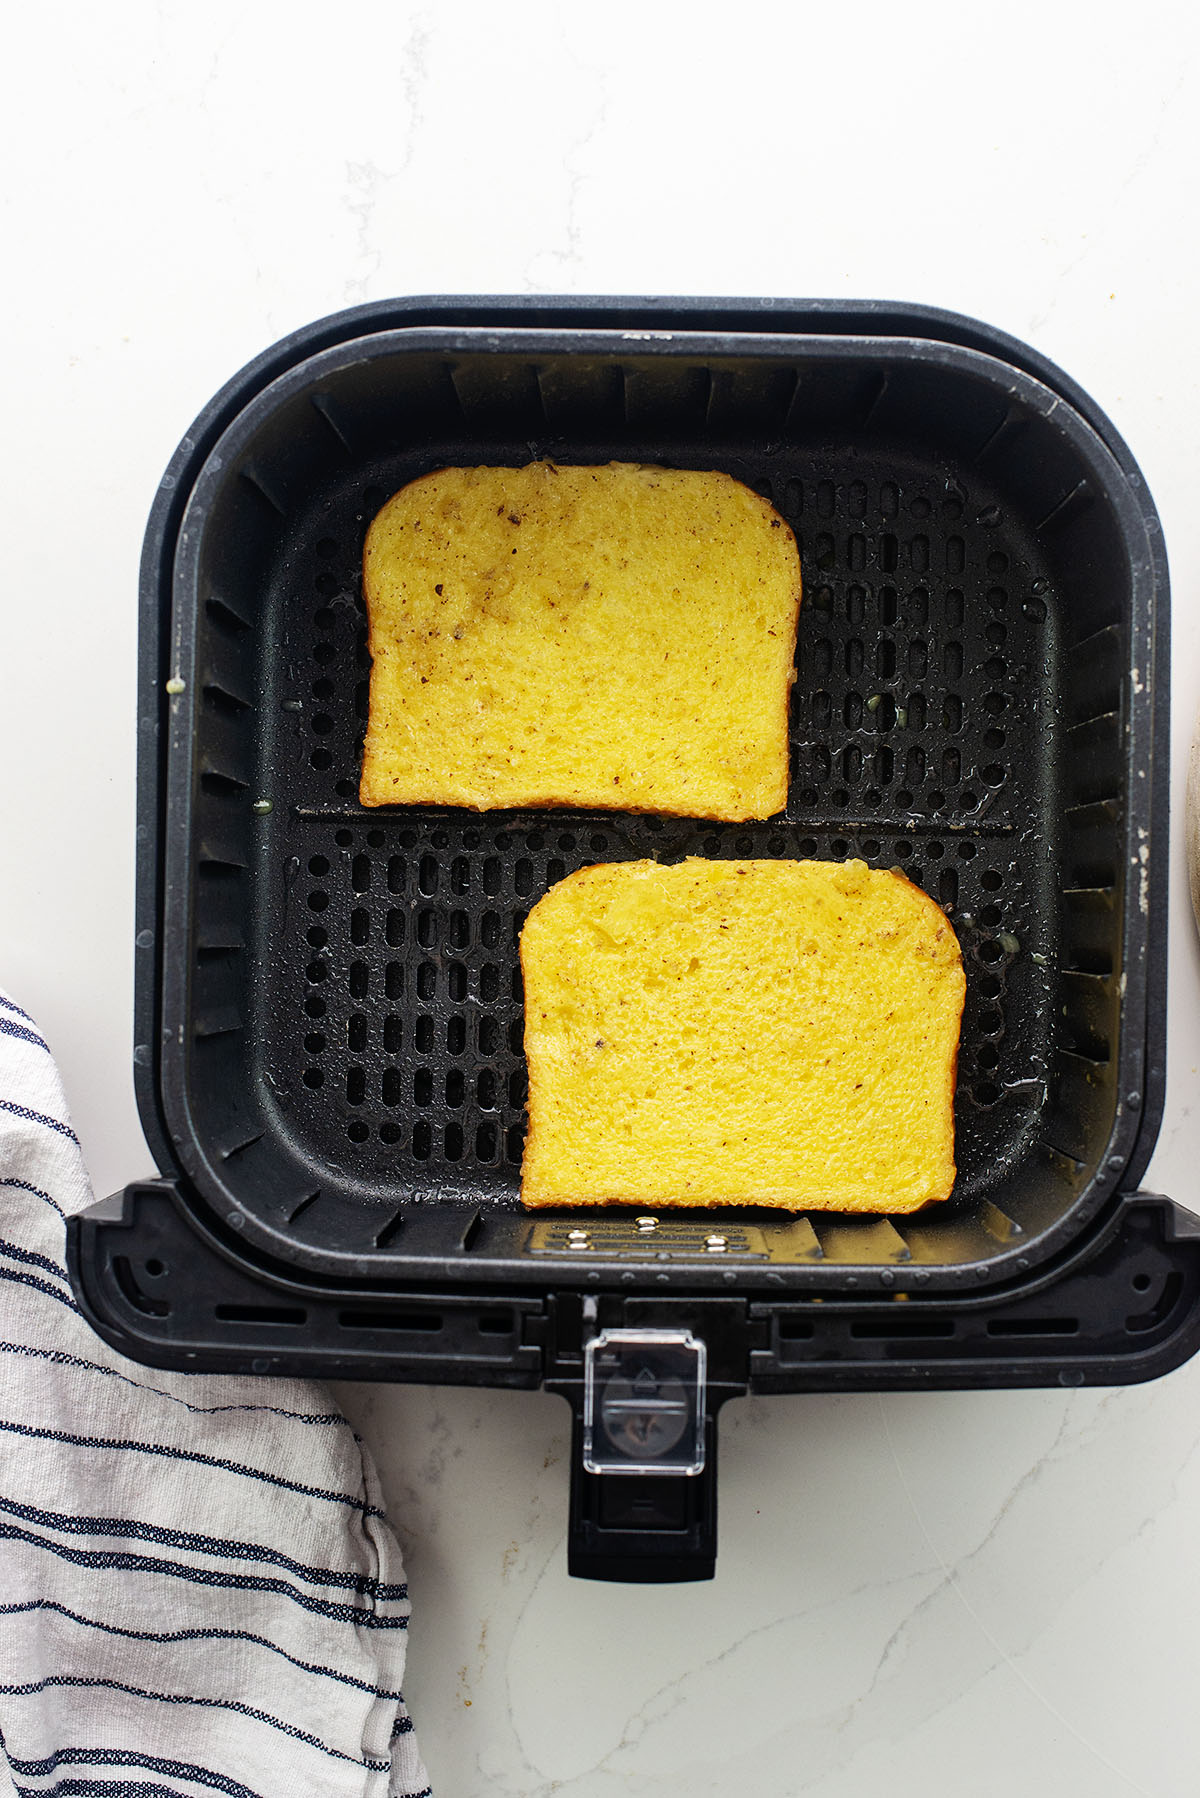 Two uncooked slices of French toast in an air fryer basket.